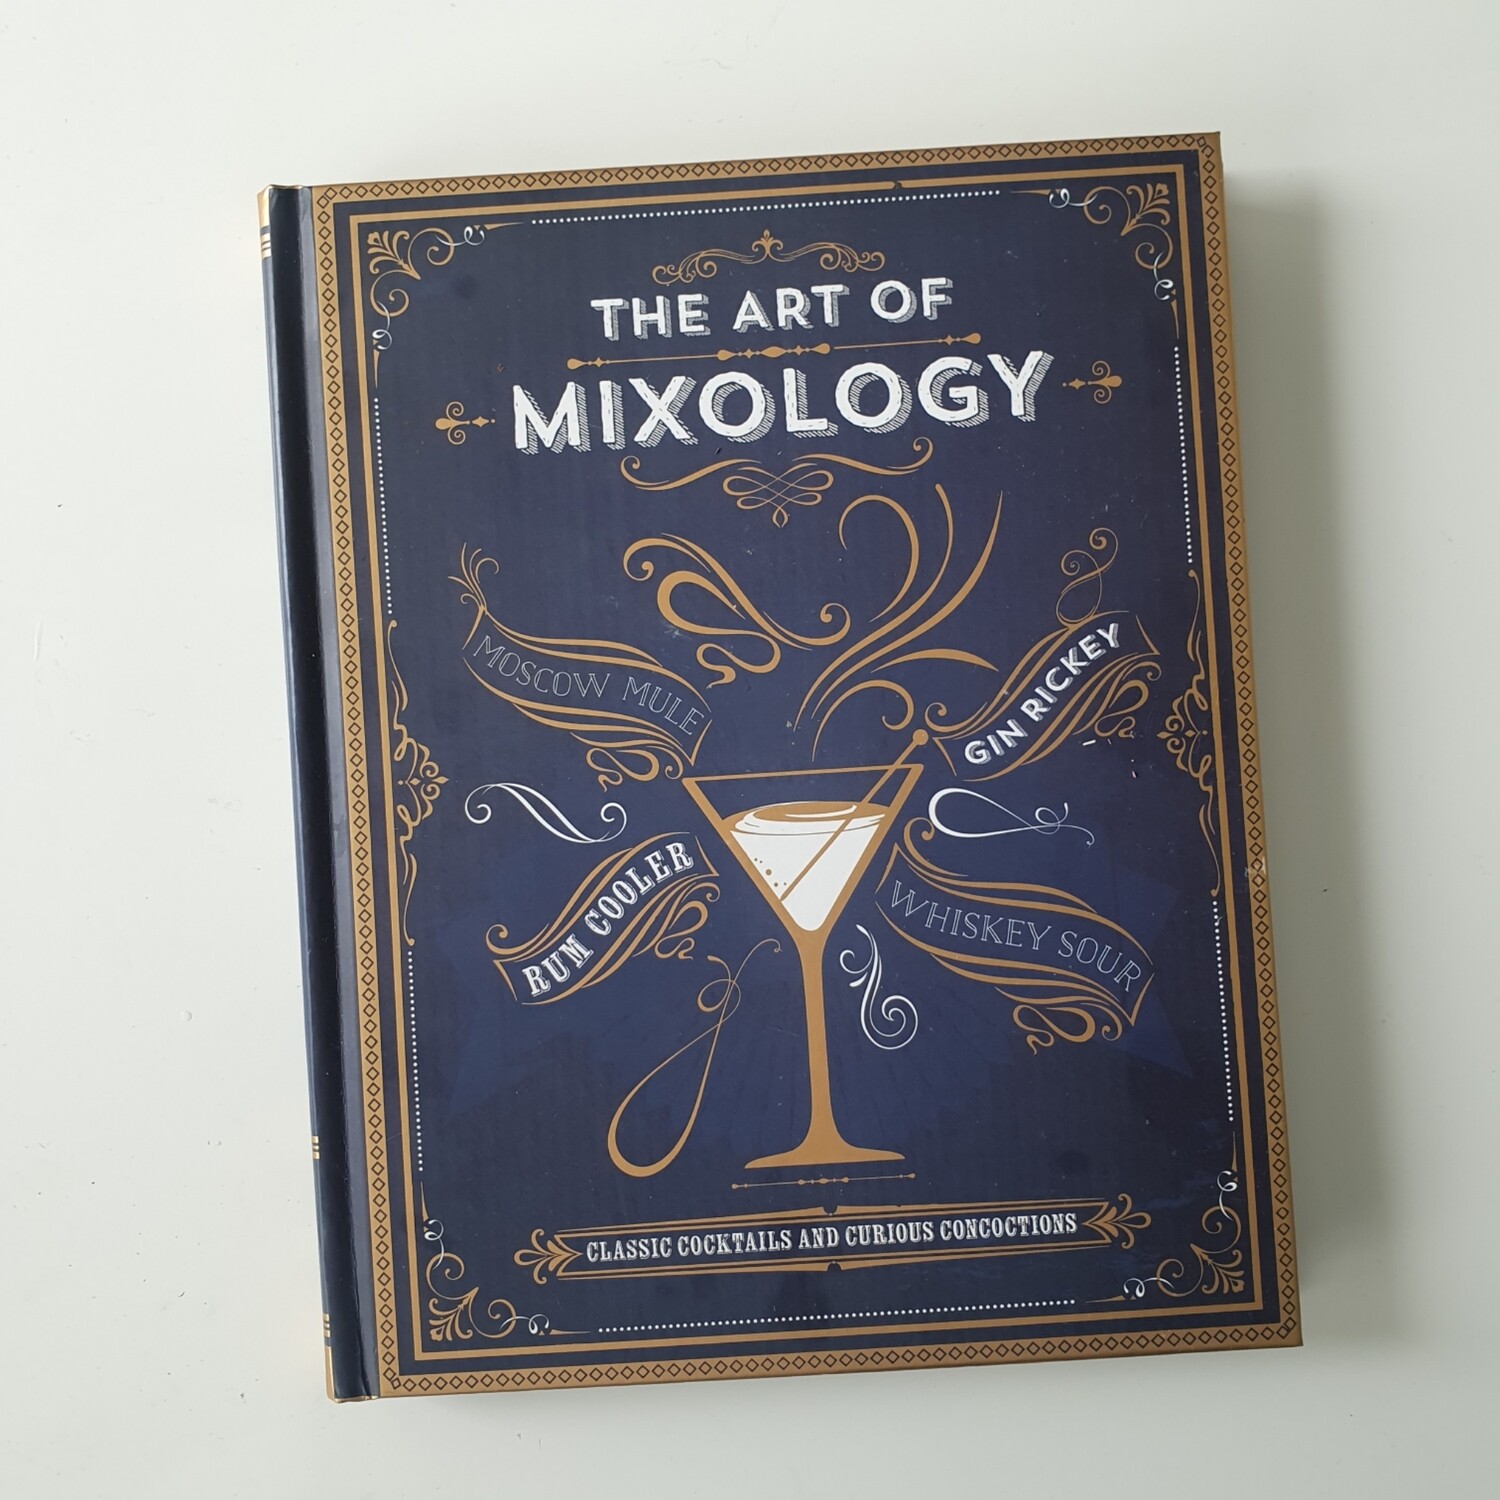 The Art of Mixology - Gin, cocktails Notebook